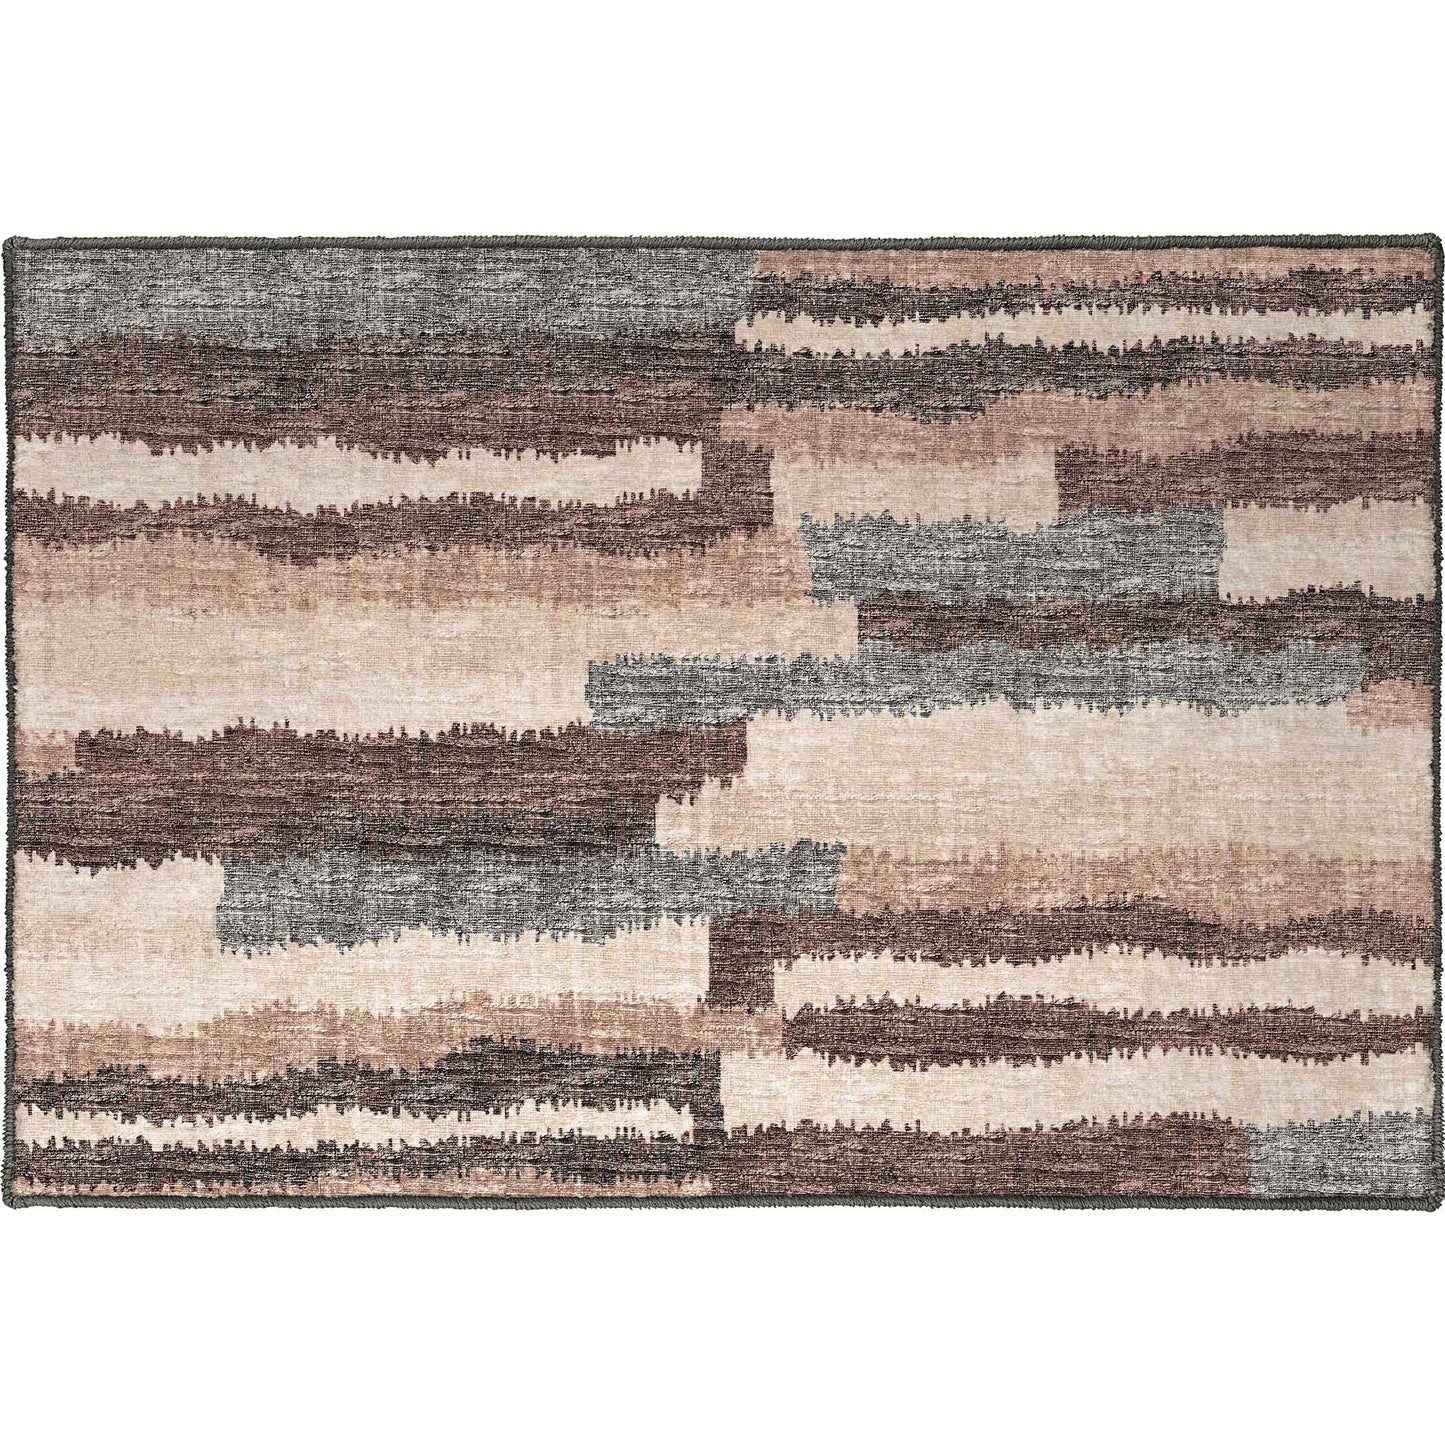 Dalyn Rugs Brisbane BR7 Sable  Contemporary Machinemade Rug